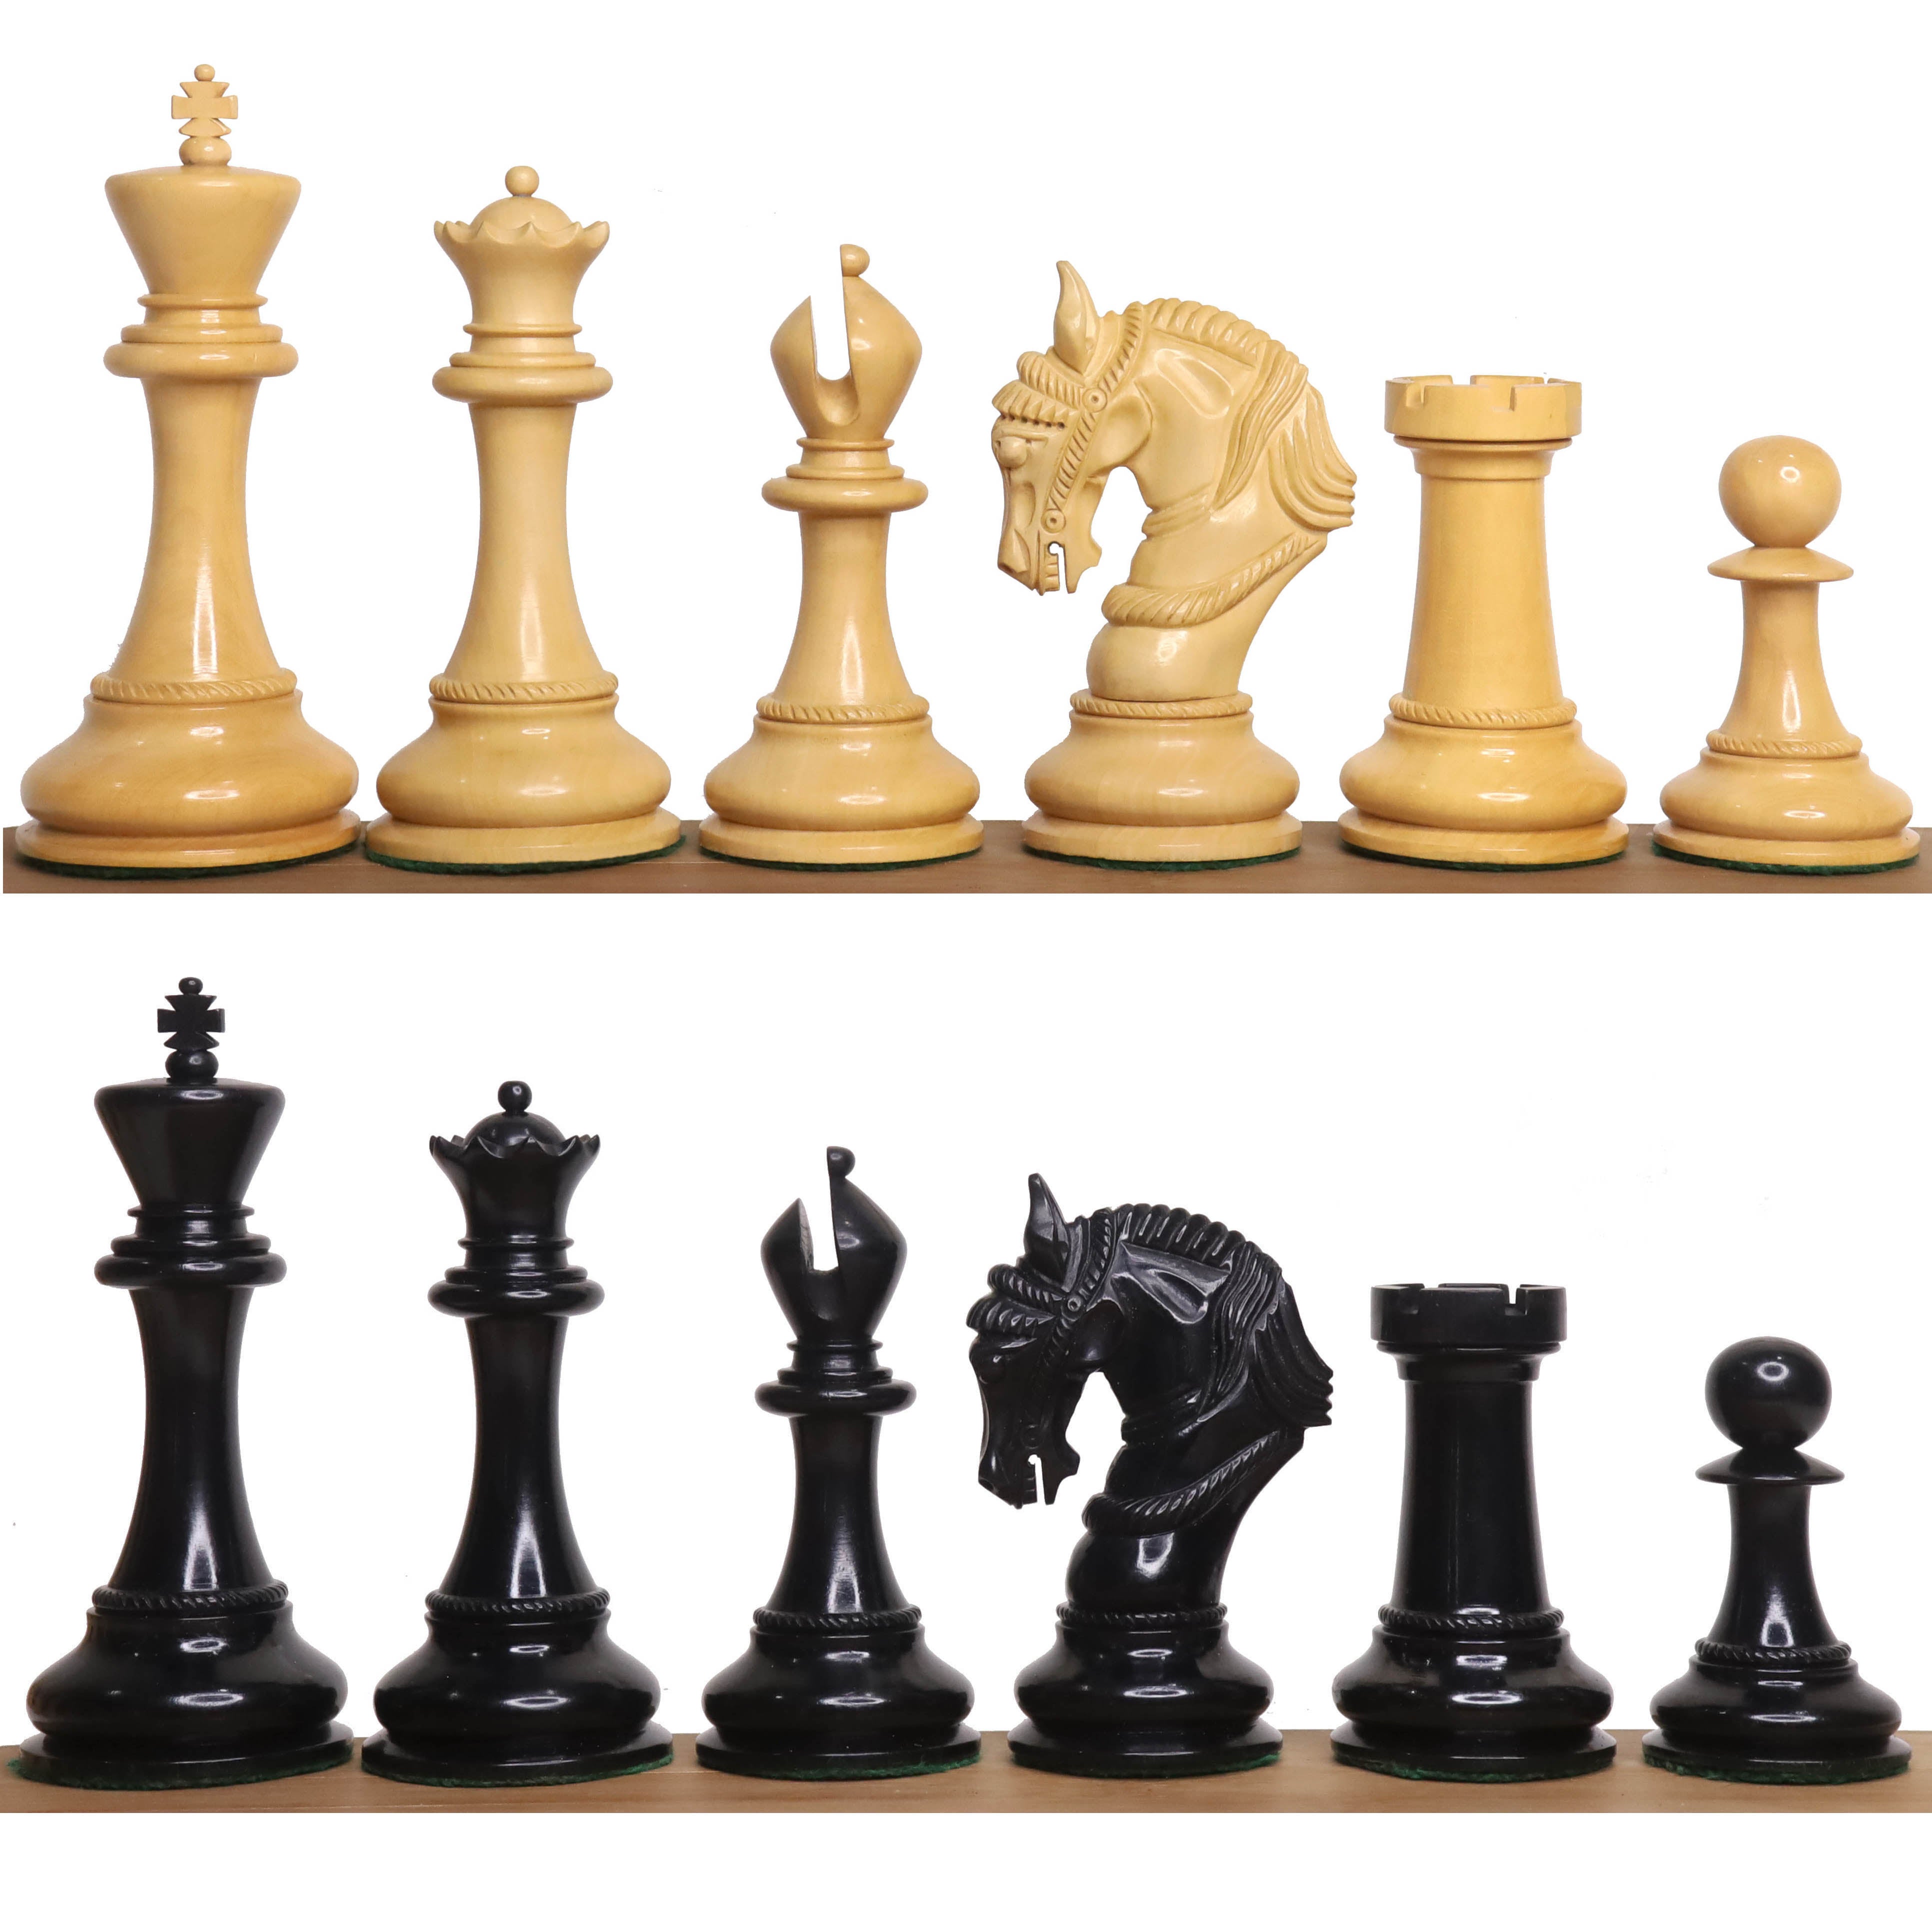 4.5" Imperator Luxury Staunton Chess Pieces Only Set - Ebony Wood -Triple Weight